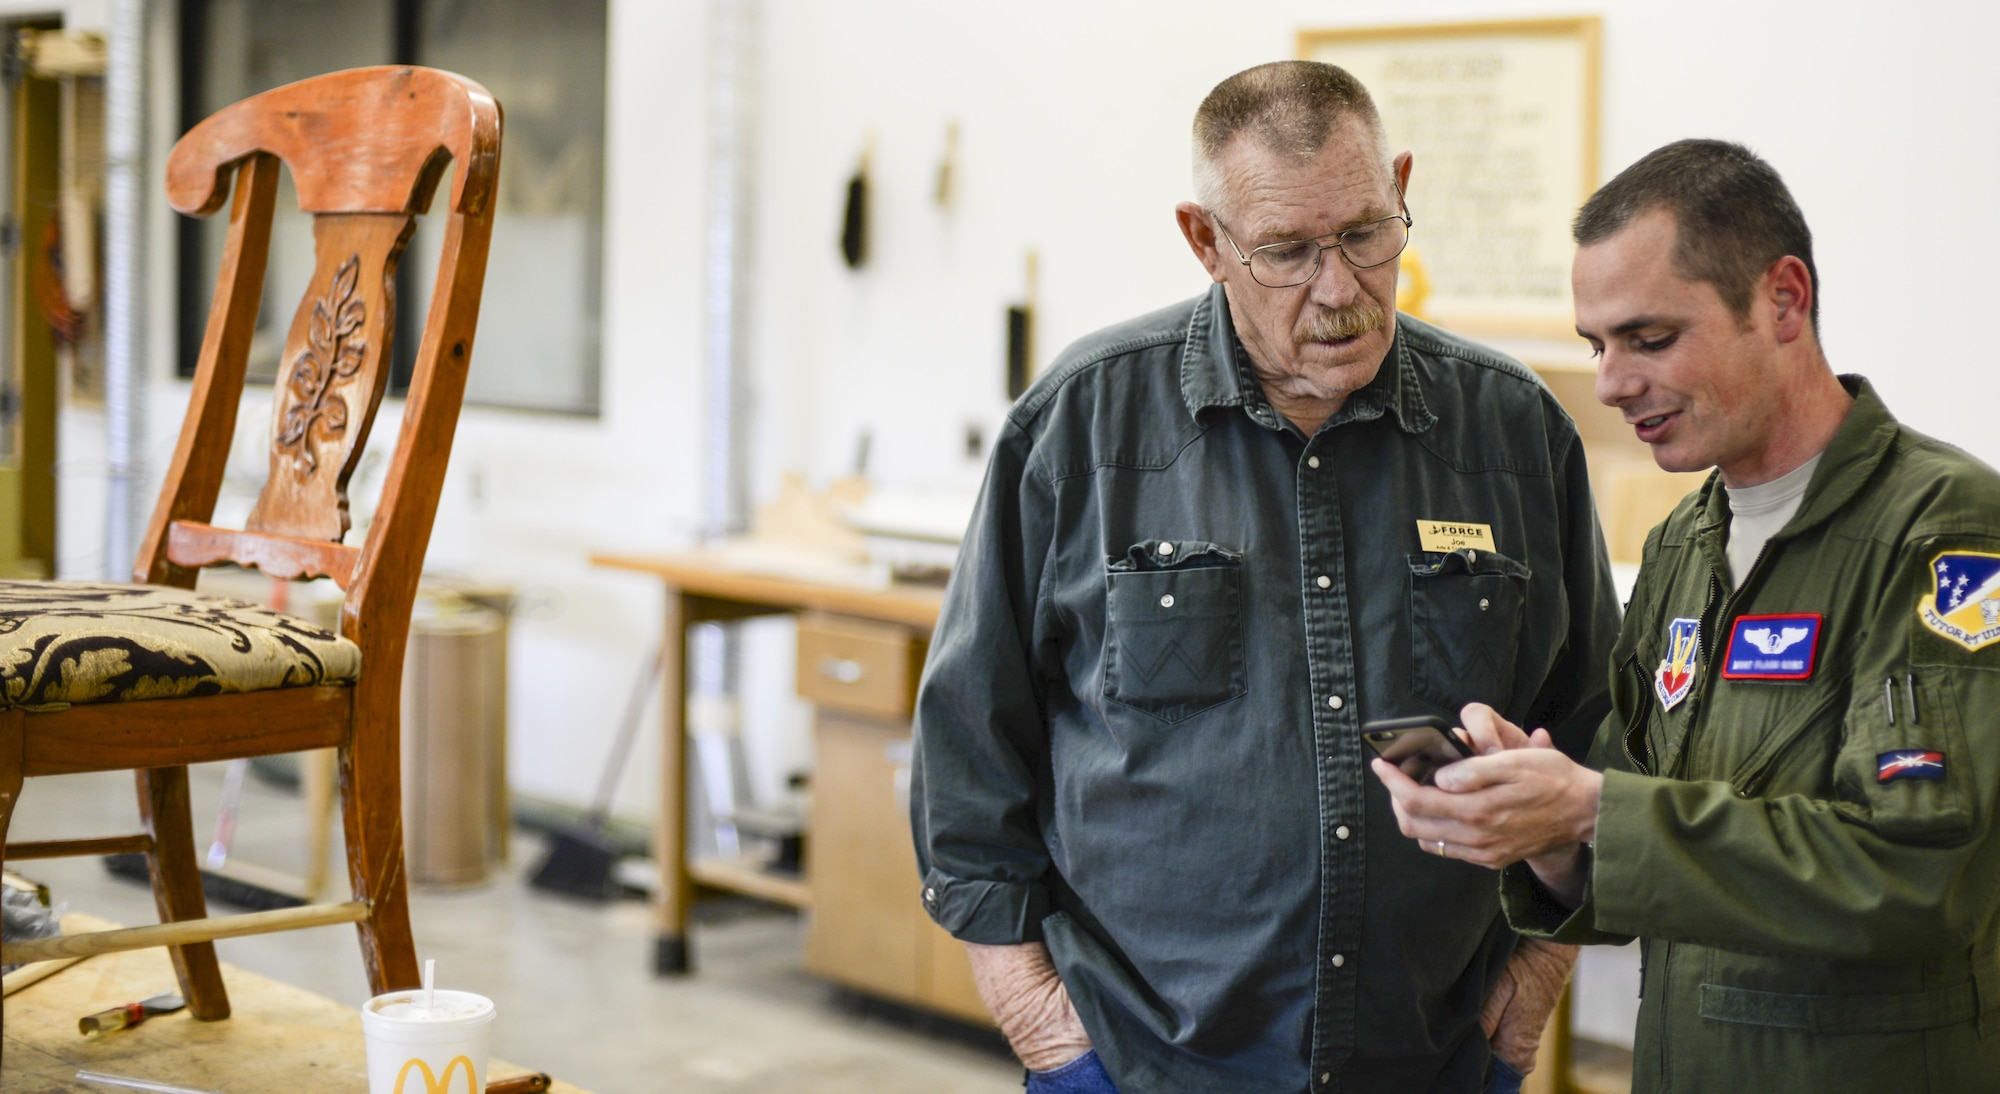 Master Sgt. Joshua, the 9th Attack Squadron superintendent, gets advice from Joe, the 49th Force Support Squadron Wood Shop supervisor, on an upcoming project at Holloman Air Force Base, N.N. 9 Aug. 2016. The Wood Shop is open every Tuesday and Thursday afternoon from 3-6 p.m. (Last names are being withheld due to operational requirements. U.S. Air Force photo by Airman Alexis P. Docherty) 